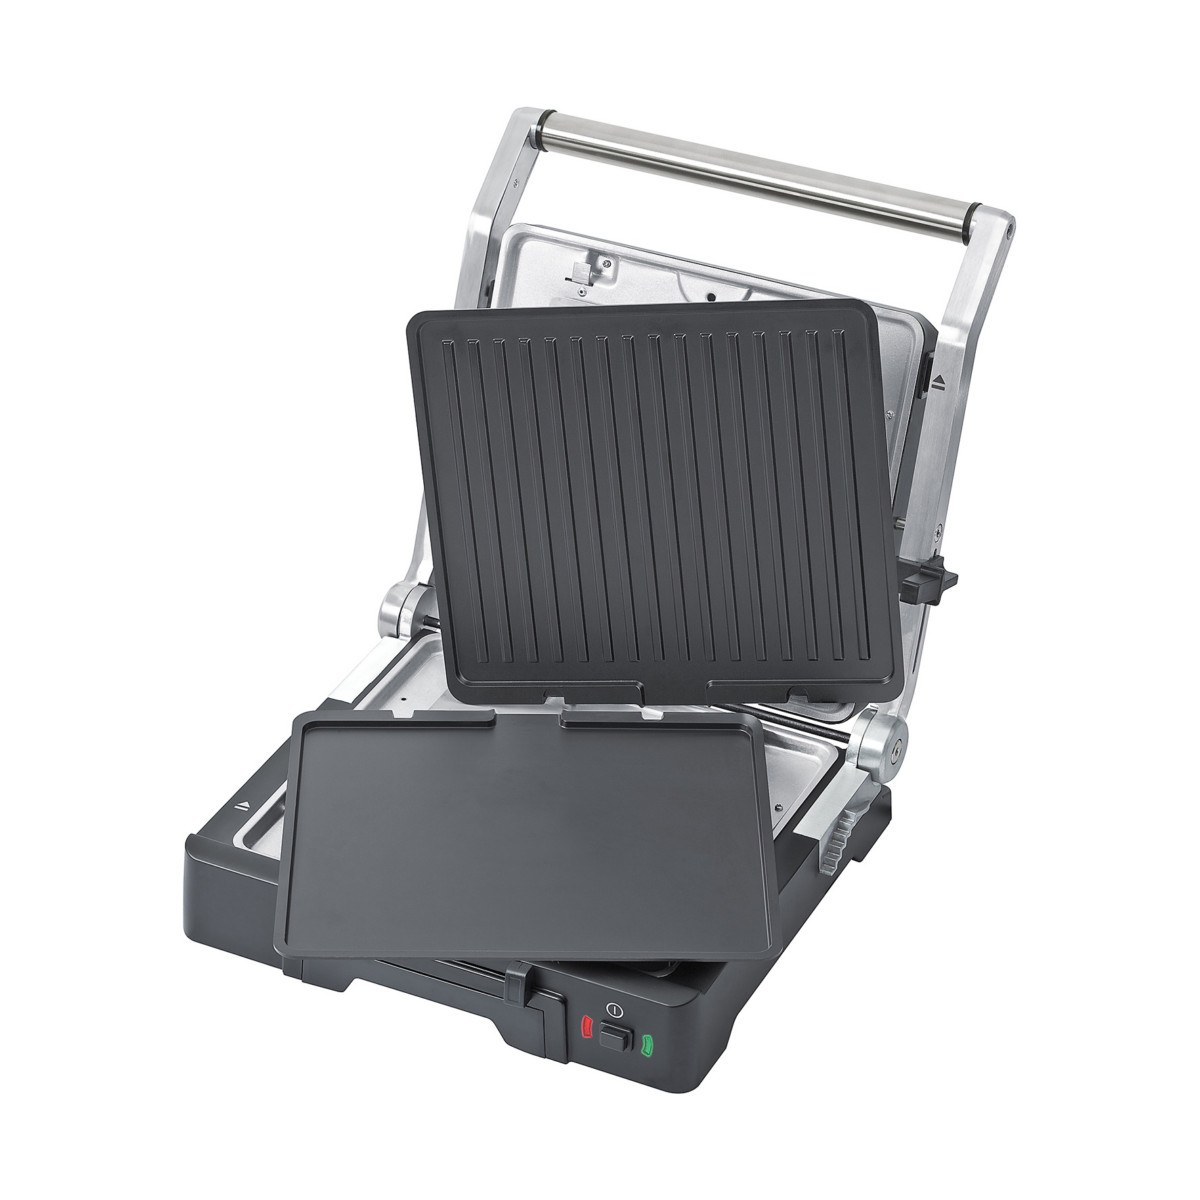 STEBA Cool-Touch-Grill FG 70 Inox - skroutz κύπρου - skroutz.com.cy